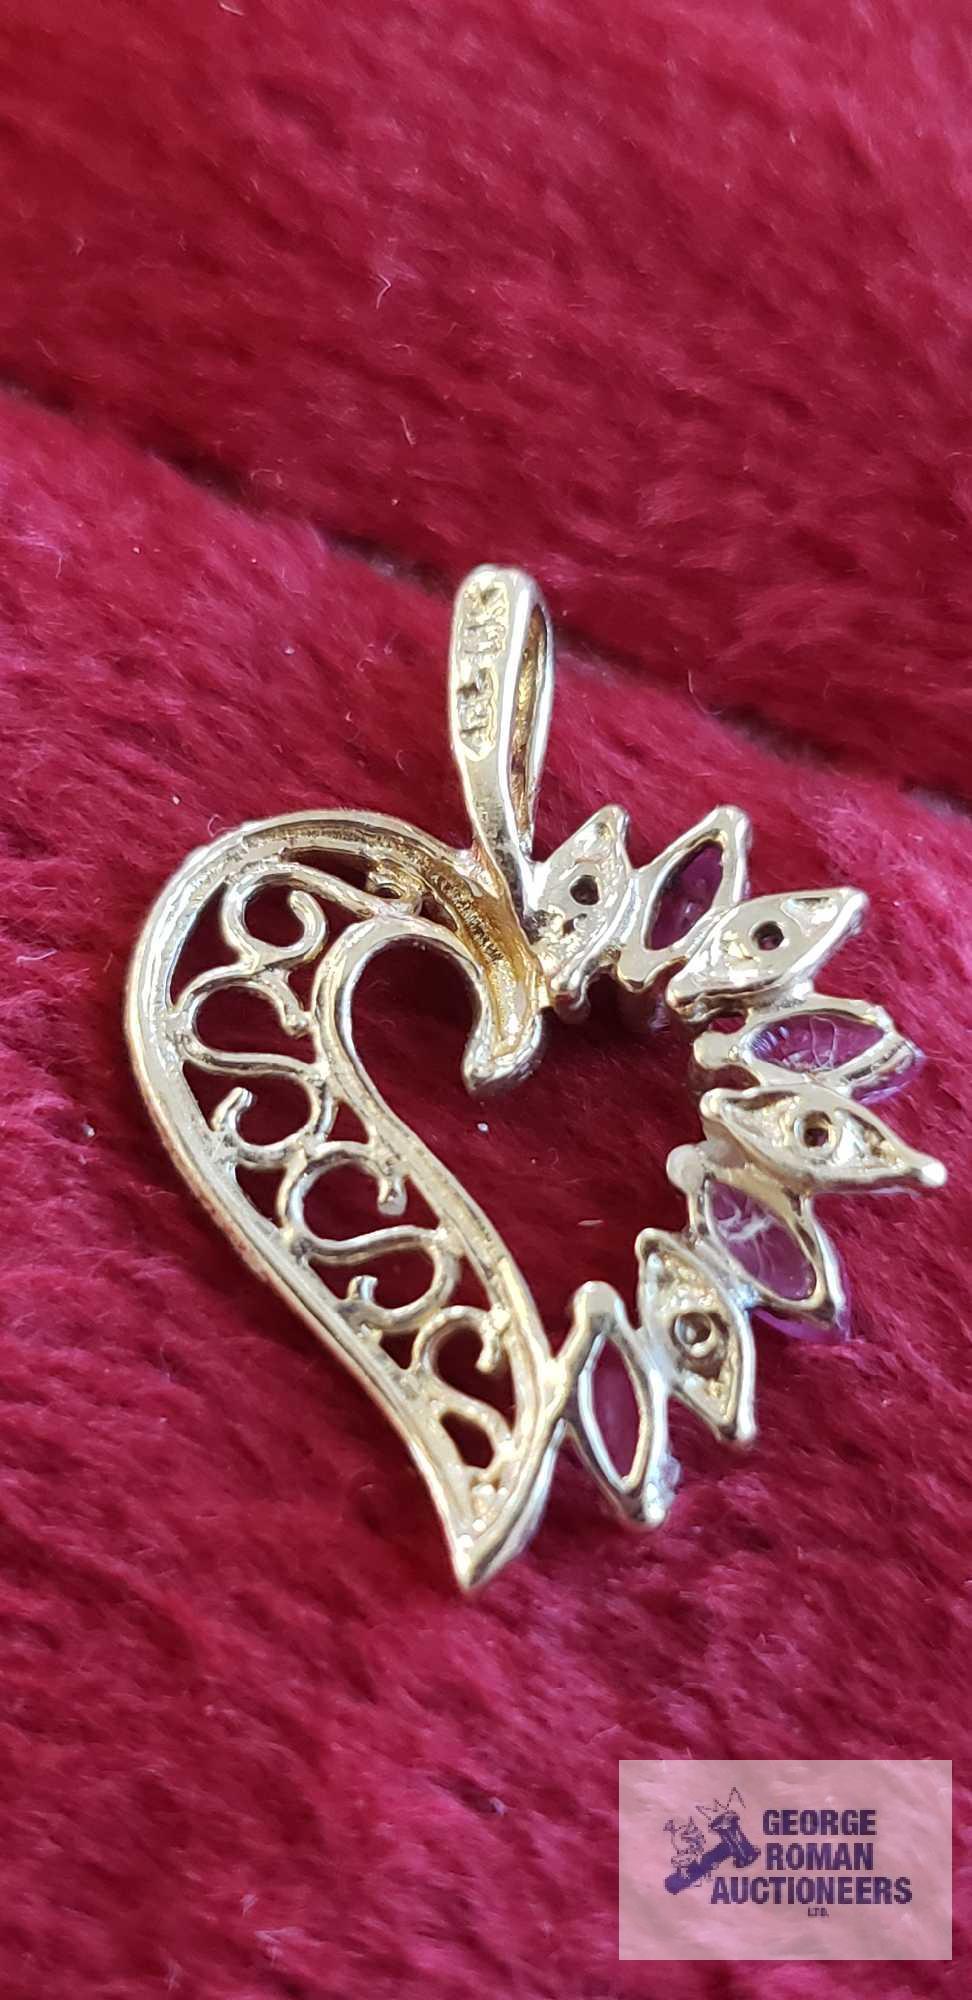 Gold colored heart-shaped pendant with clear and pinkish purple gemstones, marked 10K, approximate